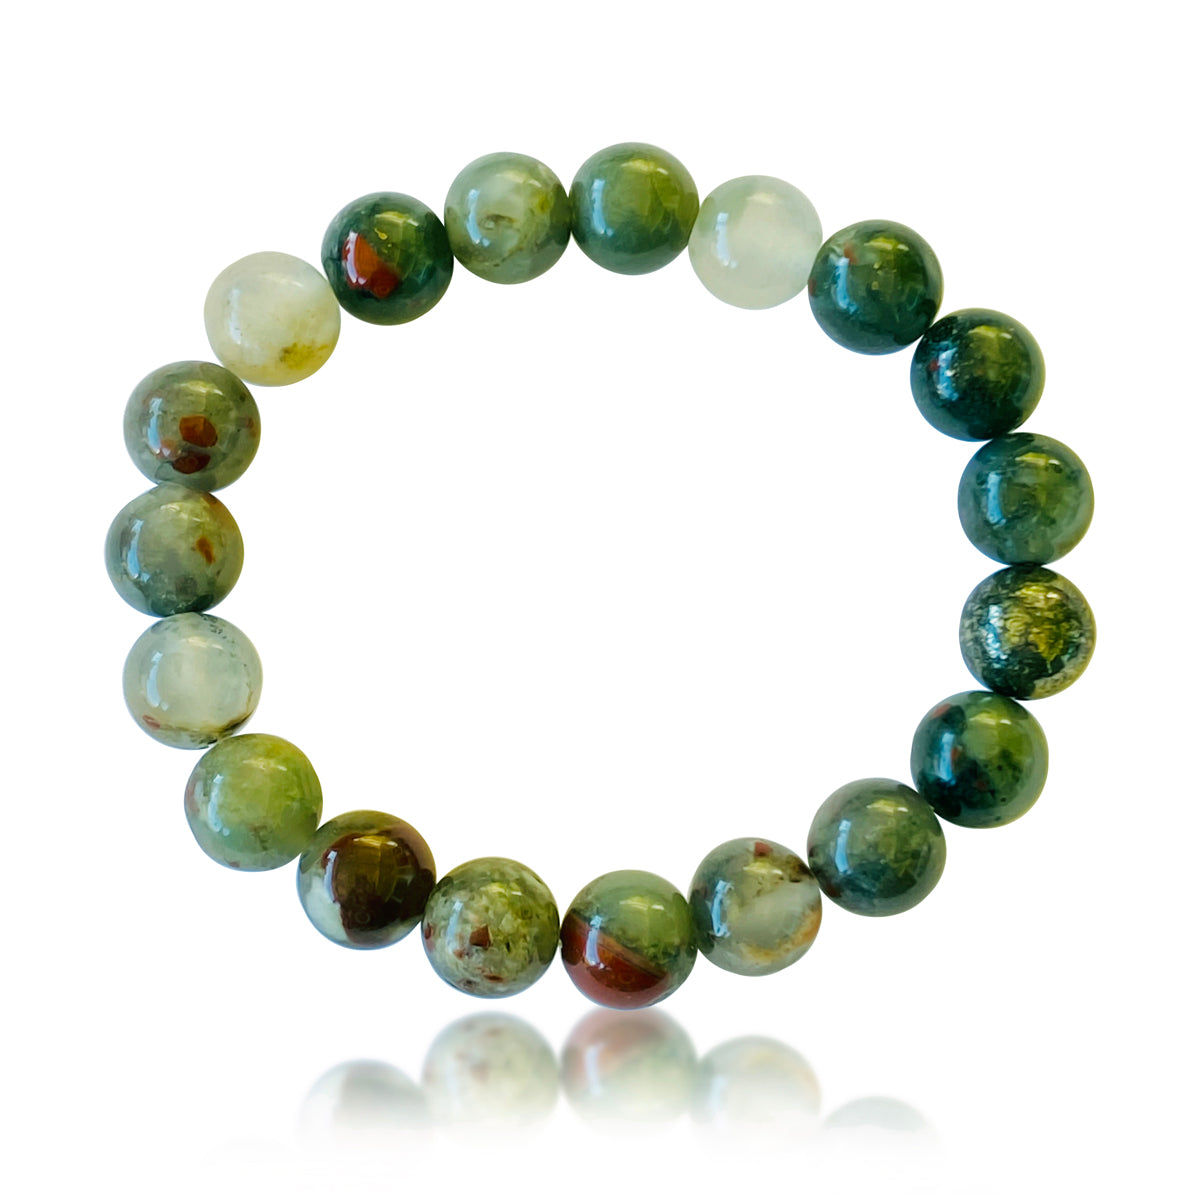 Bloodstone Bracelet for Courage.  Bloodstone is a stone of courage and wisdom, noble sacrifice, and altruistic character. Bloodstone represents a courageous spirit.